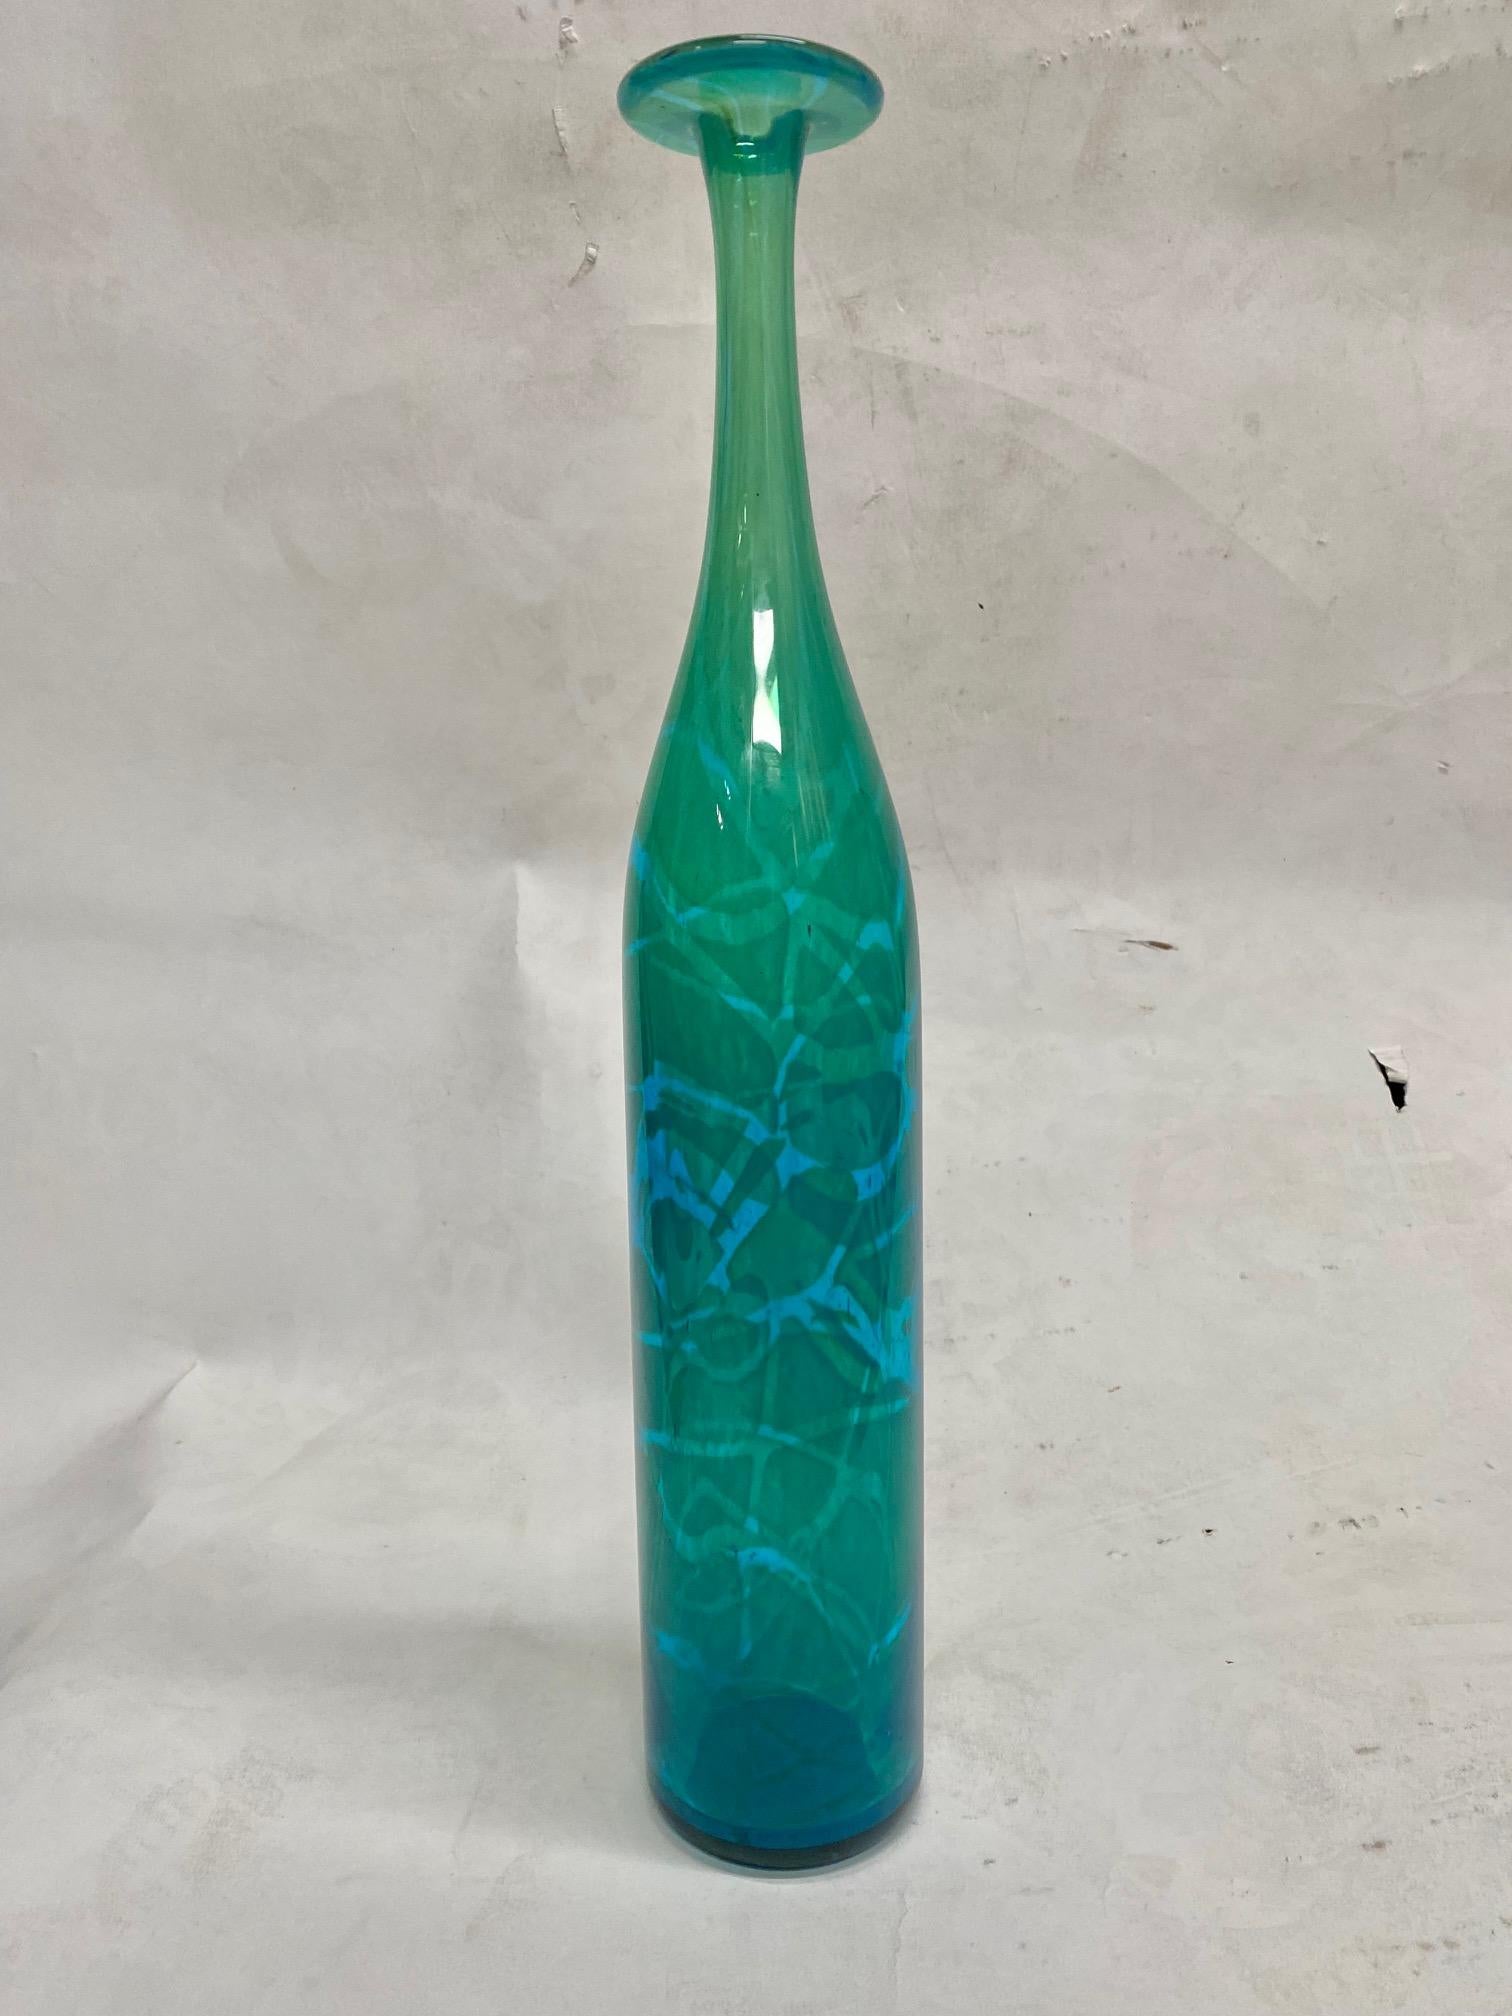 Blue and green Mdina tall glass bottle form vase by Michael Harris Signed: “Mdina”.